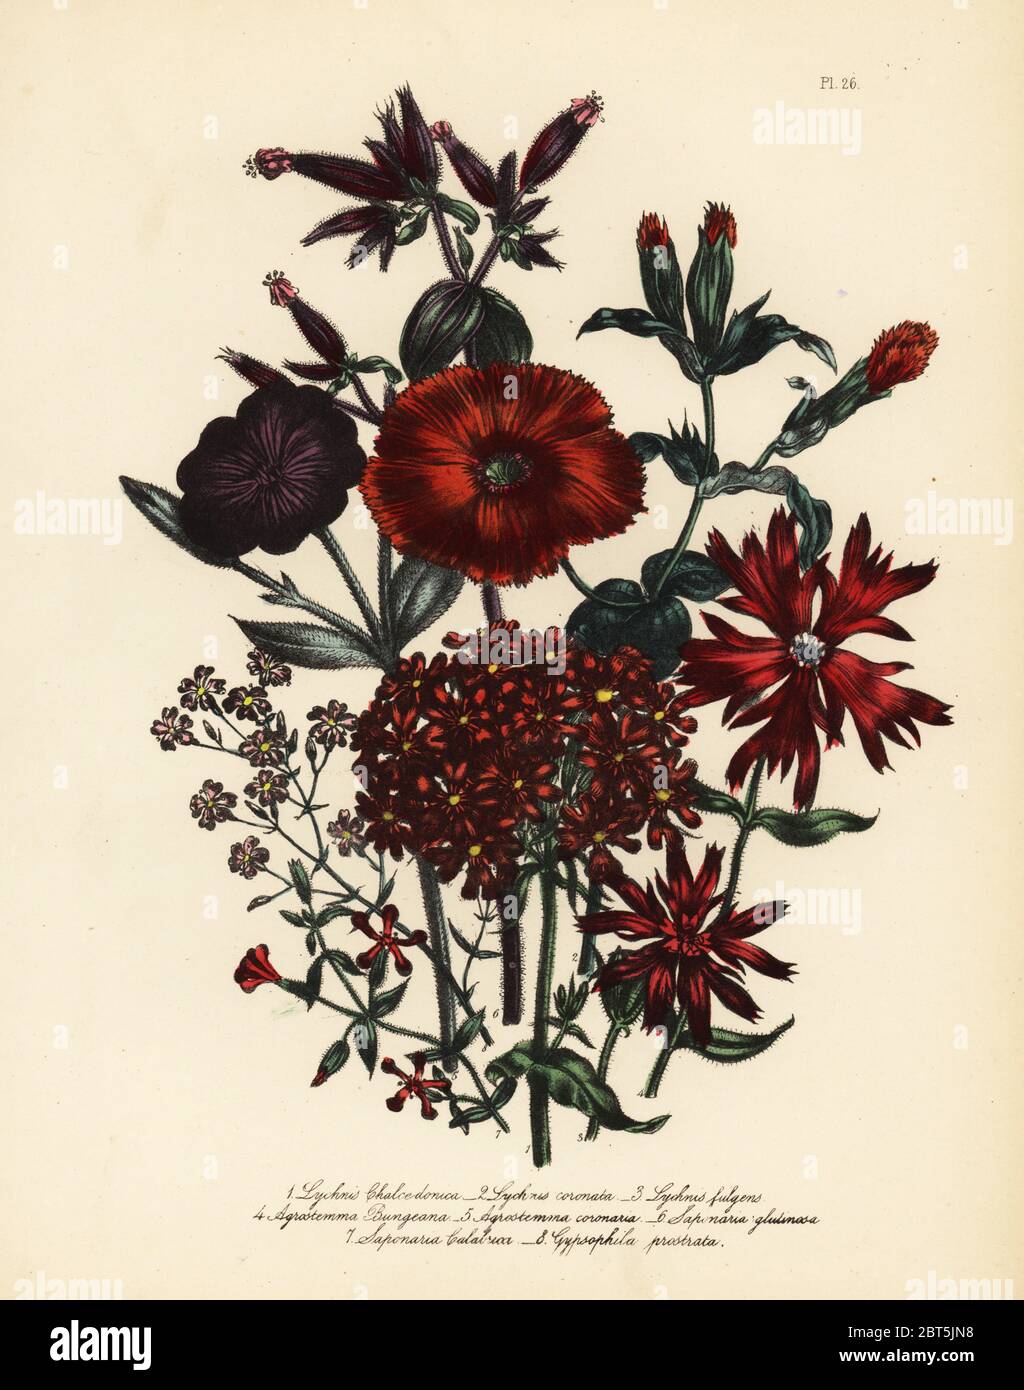 Scarlet lychnis, Lychnis chalcedonica, Chinese lychnis, Lychnis coronata, fulgent lychnis, Lychnis fulgens, Bunge's scarlet campion, Agrostemma bungeana, rose campion, Agrostemma coronaria, glutinous soapwort, Saponaria glutinosa, Calabrian soapwort, Saponaria calabrica, and Gypsophylla prostrata. Handfinished chromolithograph by Henry Noel Humphreys after an illustration by Jane Loudon from Mrs. Jane Loudon's Ladies Flower Garden of Ornamental Perennials, William S. Orr, London, 1849. Stock Photo